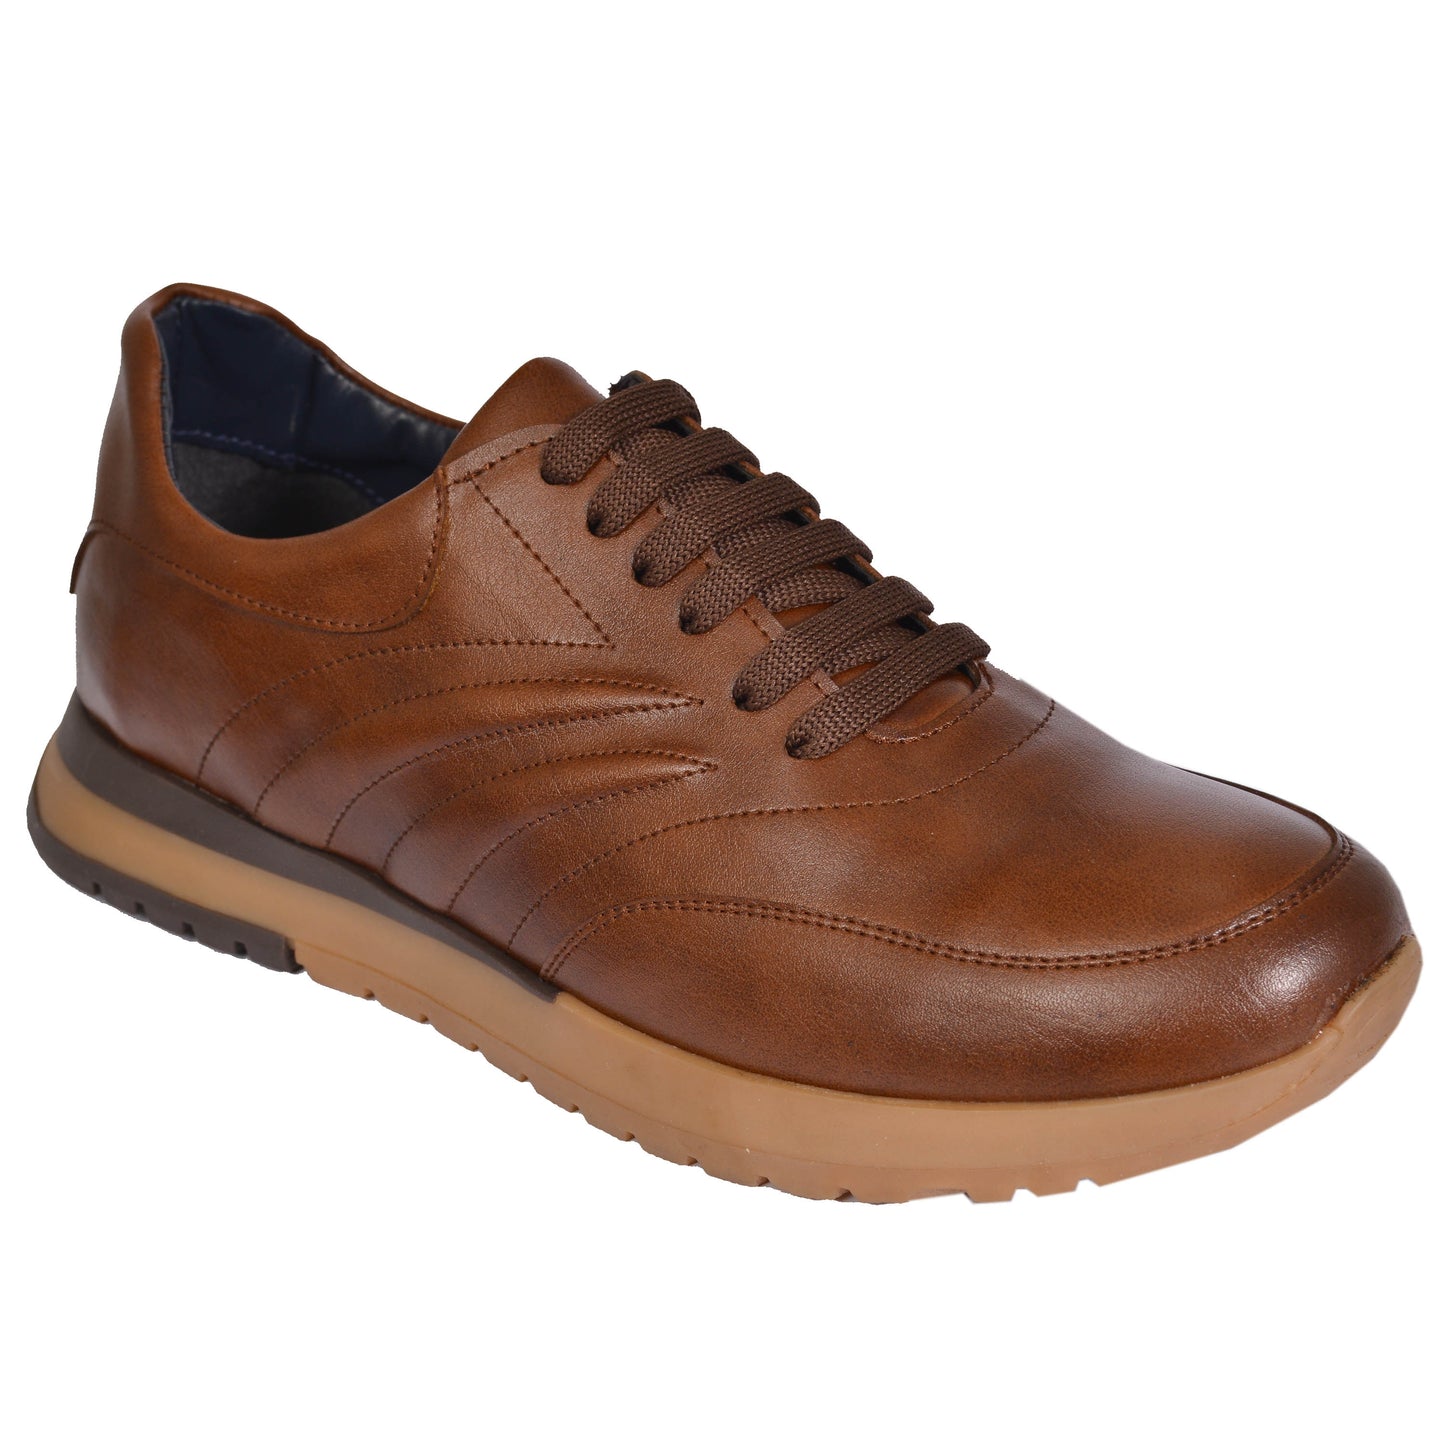 2H #9506 Brown Casual Shoes